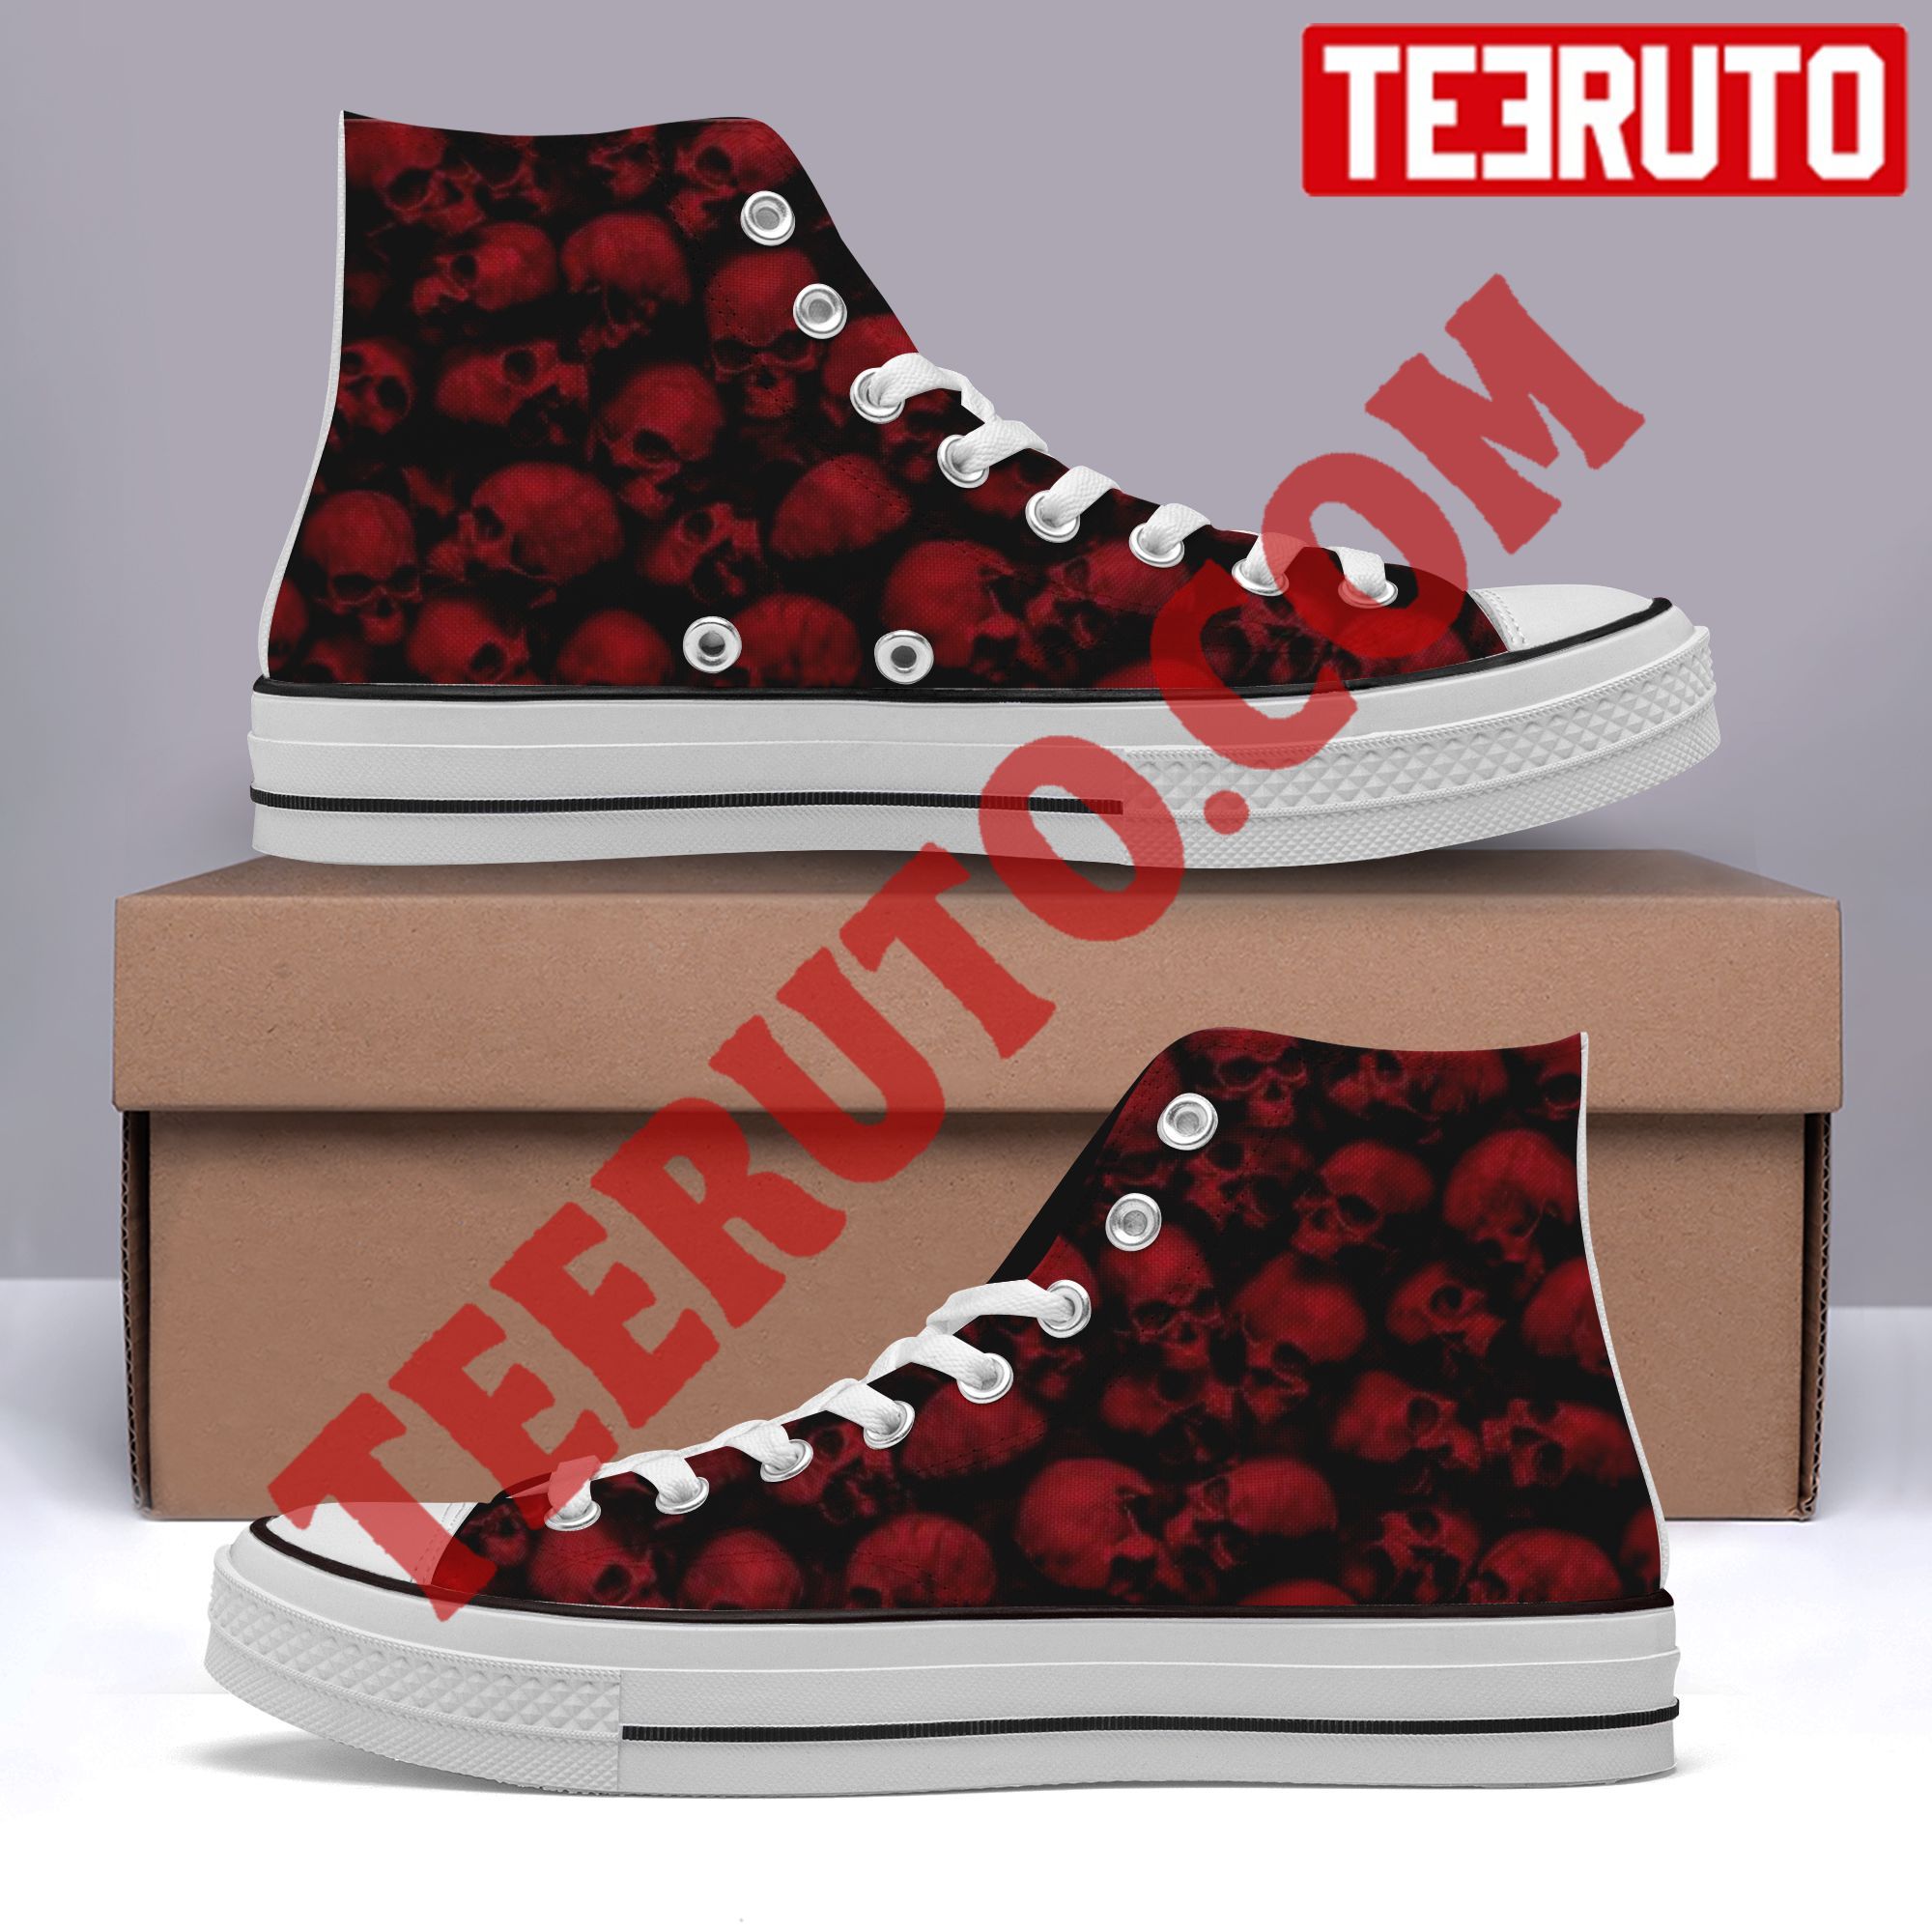 Dark Red 3d Skulls Pile For Halloween Red Spooky Blood High Top Retro Shoes